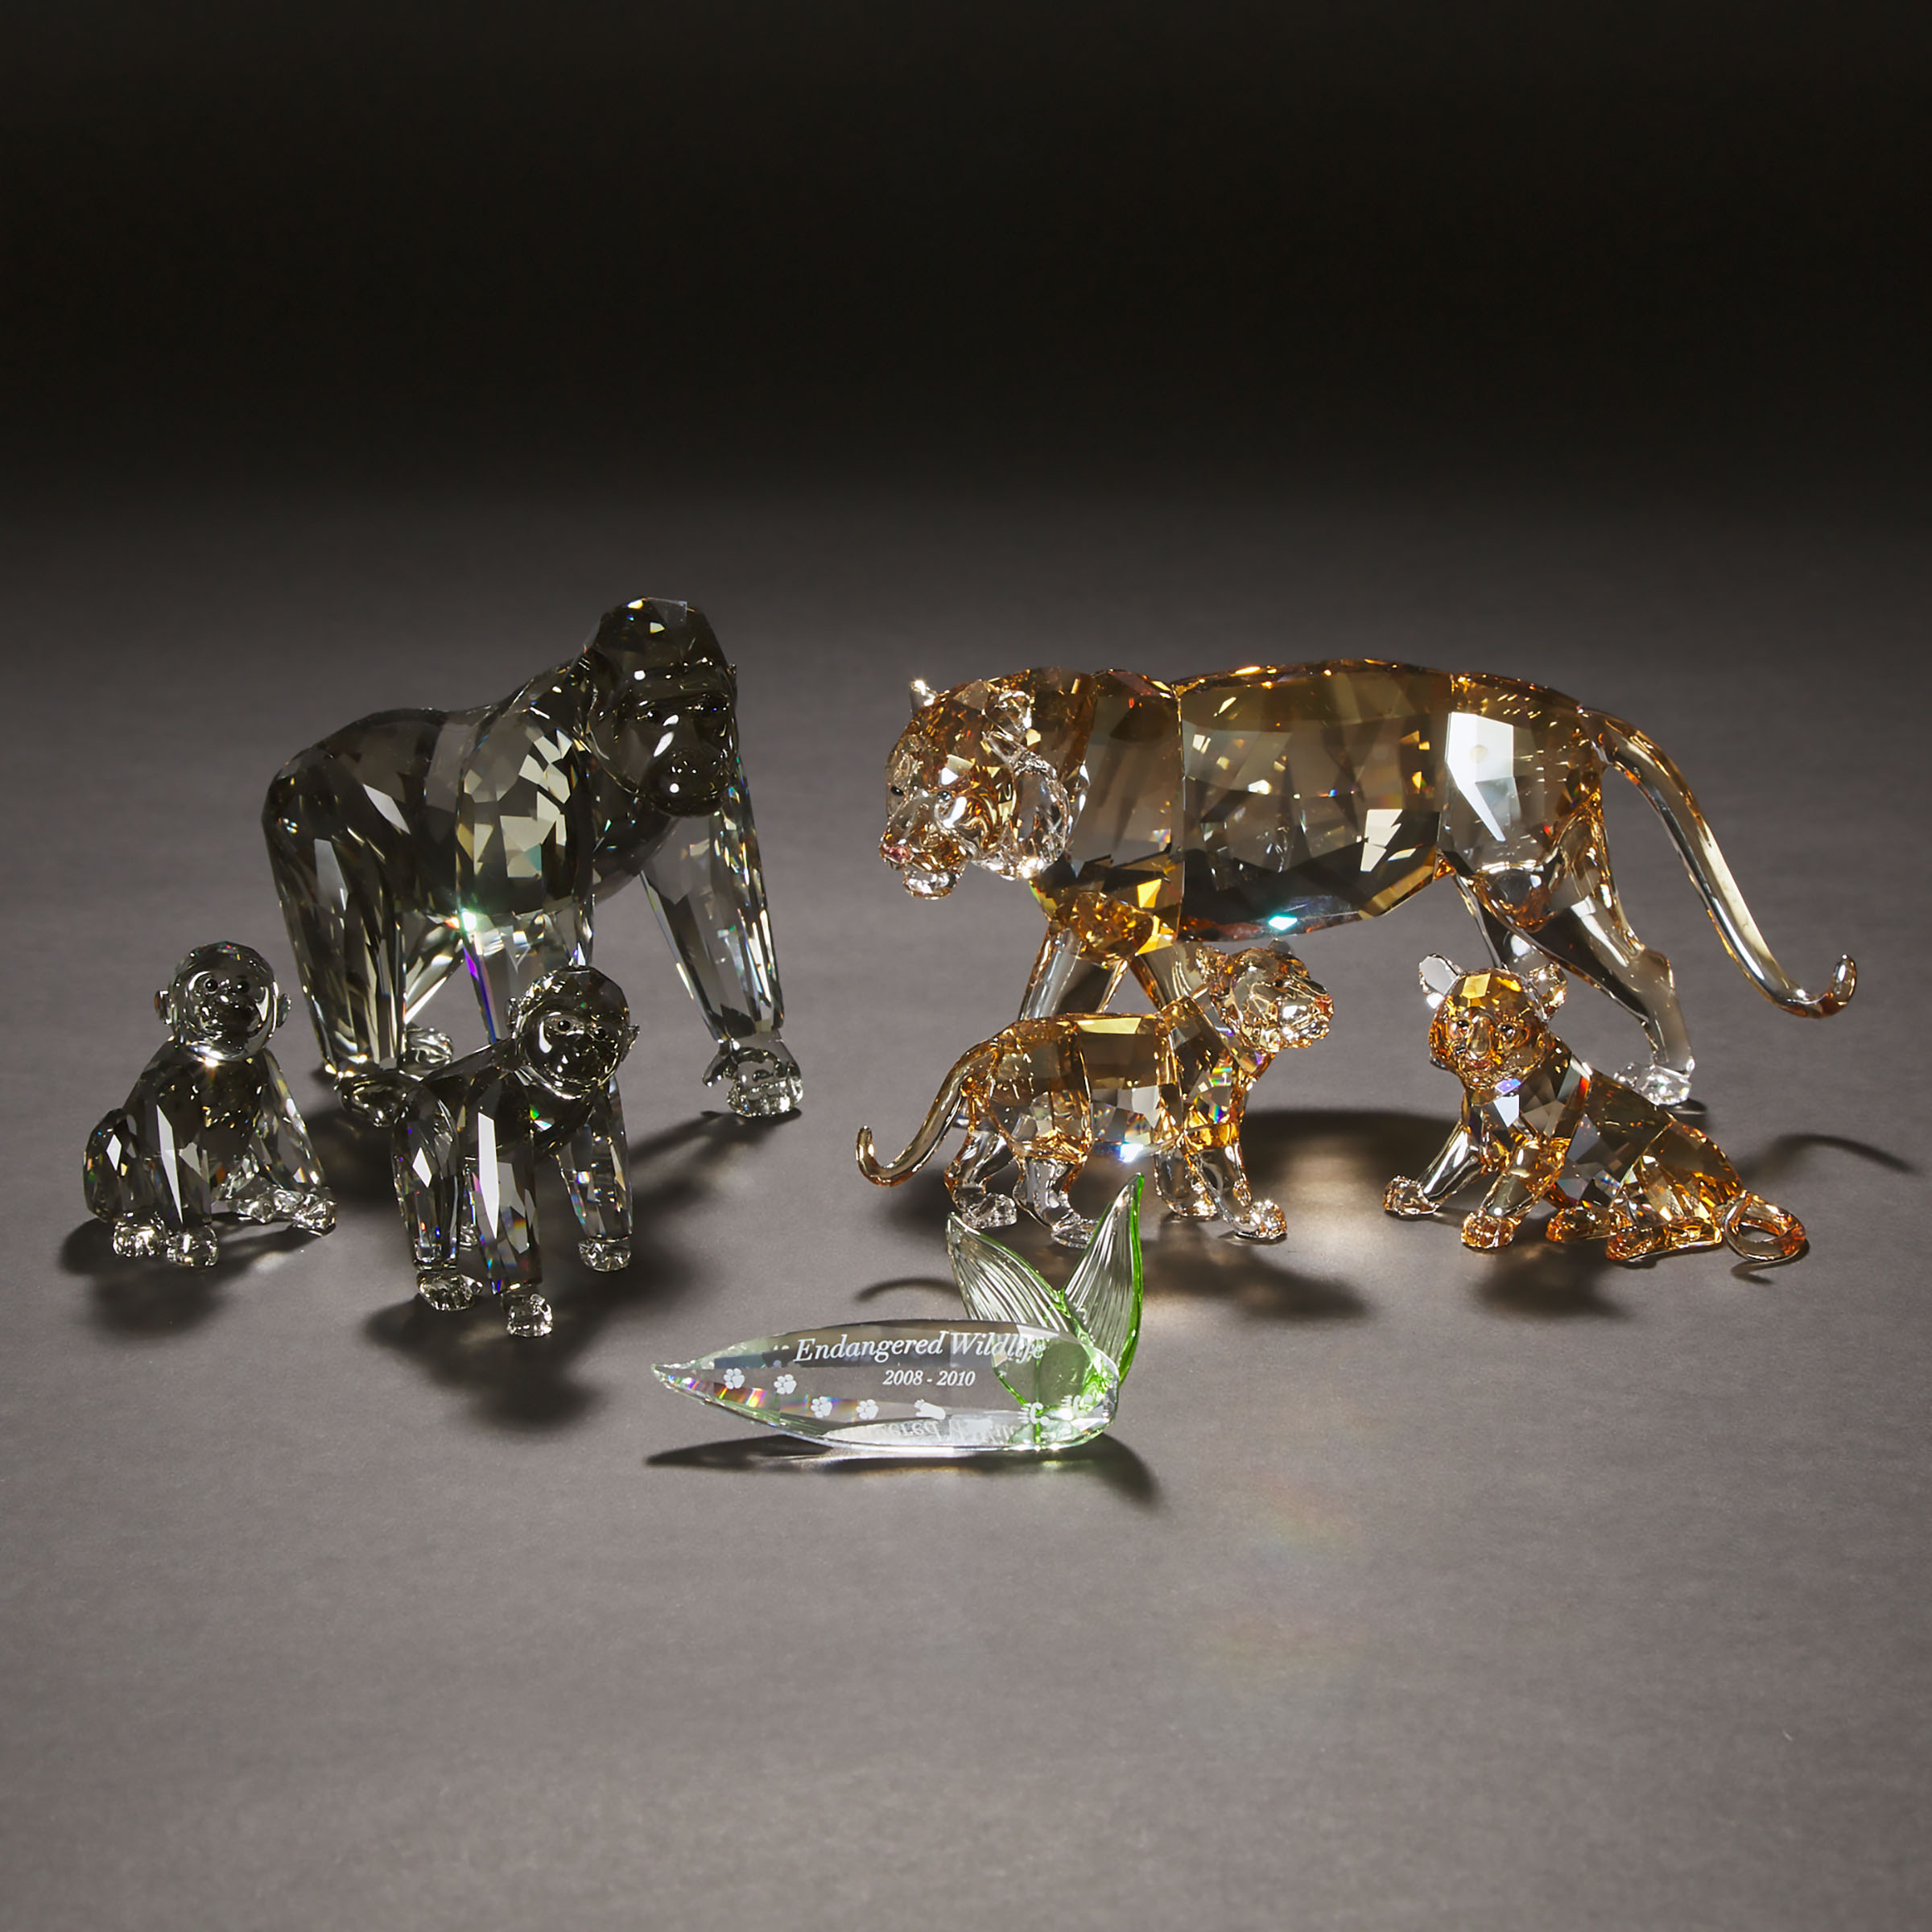 Swarovski Crystal 'Endangered Wildlife' Tiger with Two Cubs, and Gorilla with Two Infants, 2009/2010